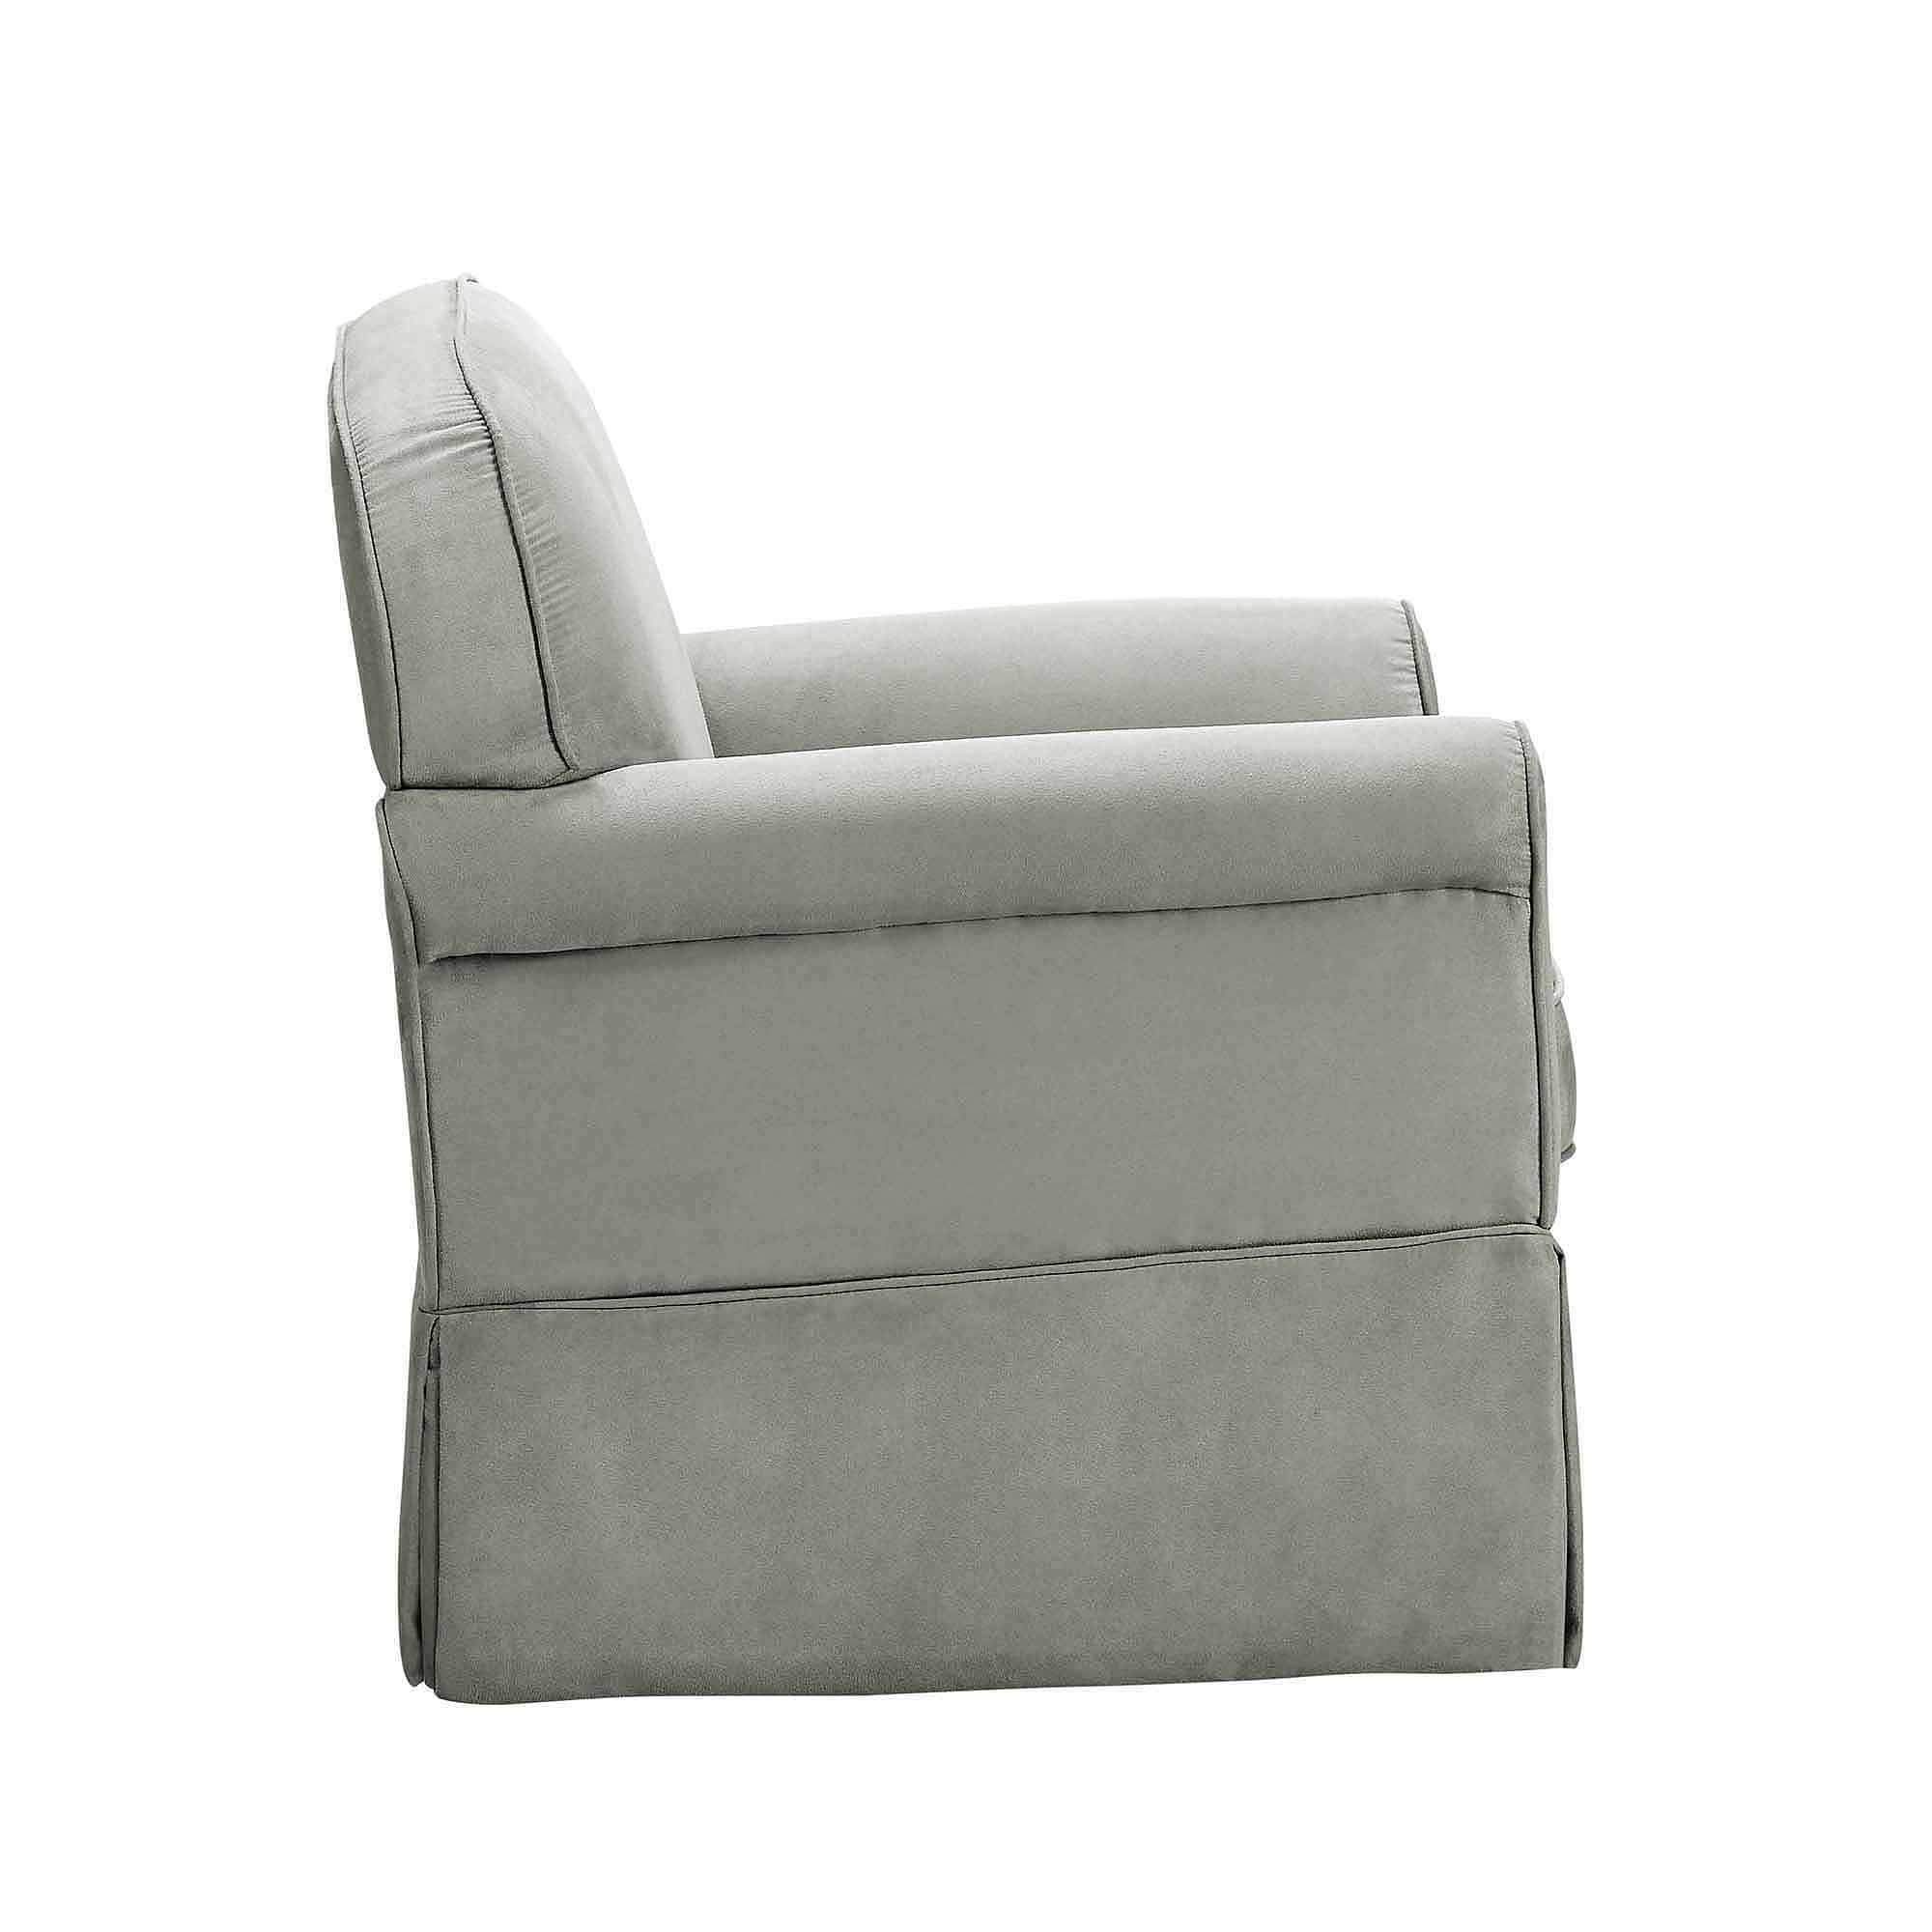 baby relax evan swivel glider and ottoman gray